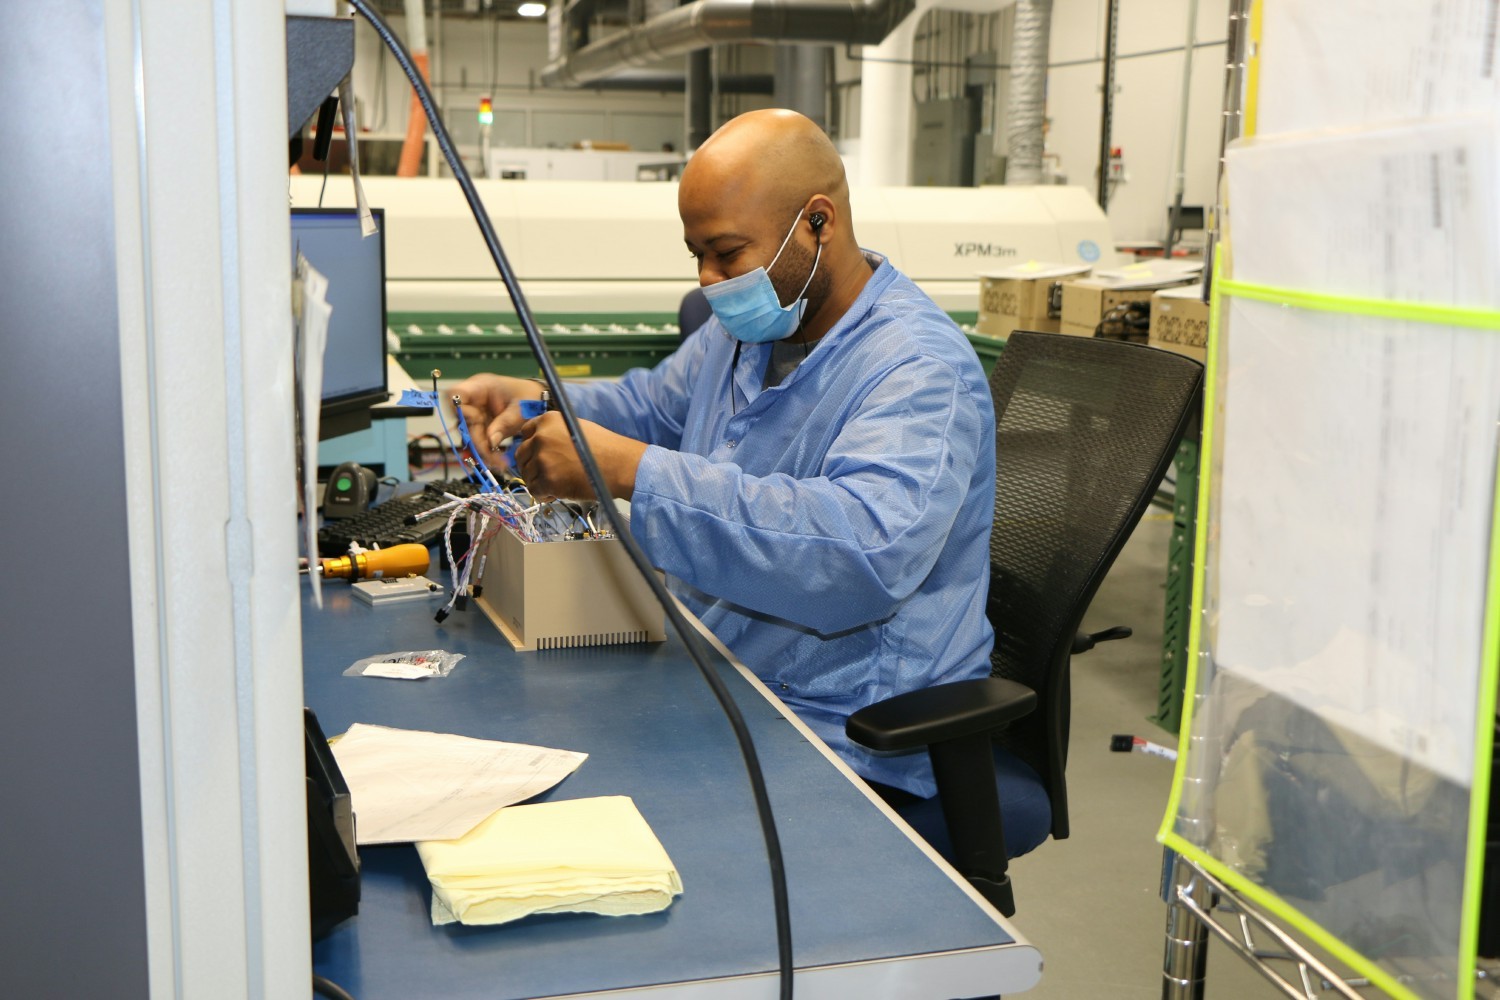 Our employees adapt to ever-changing working conditions while continuing to serve our customers.